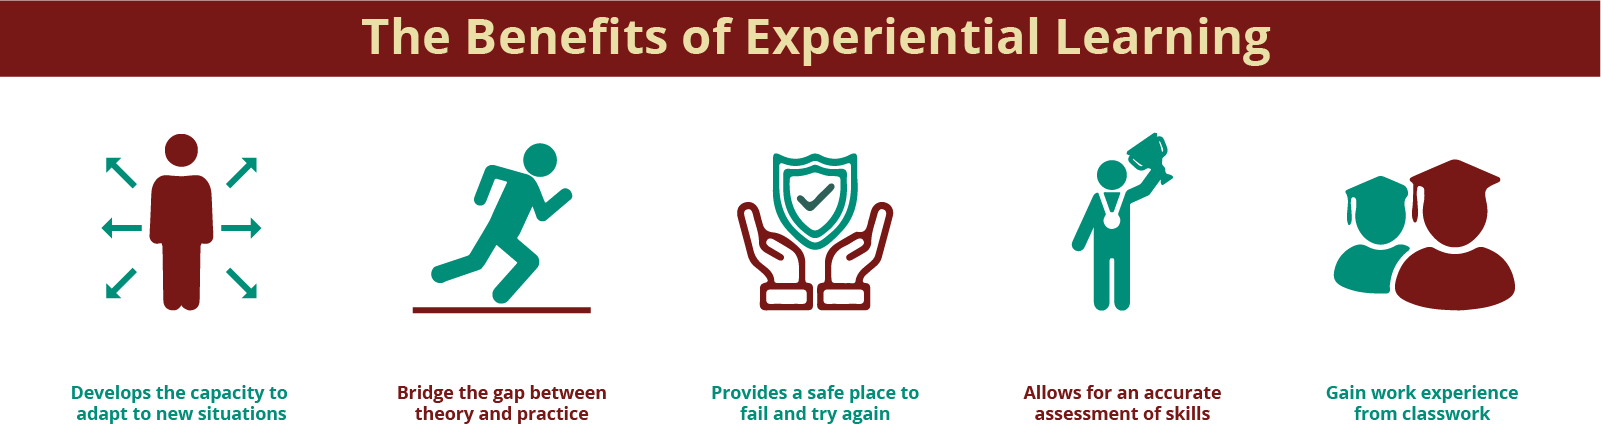 Benefits of Experiential Learning